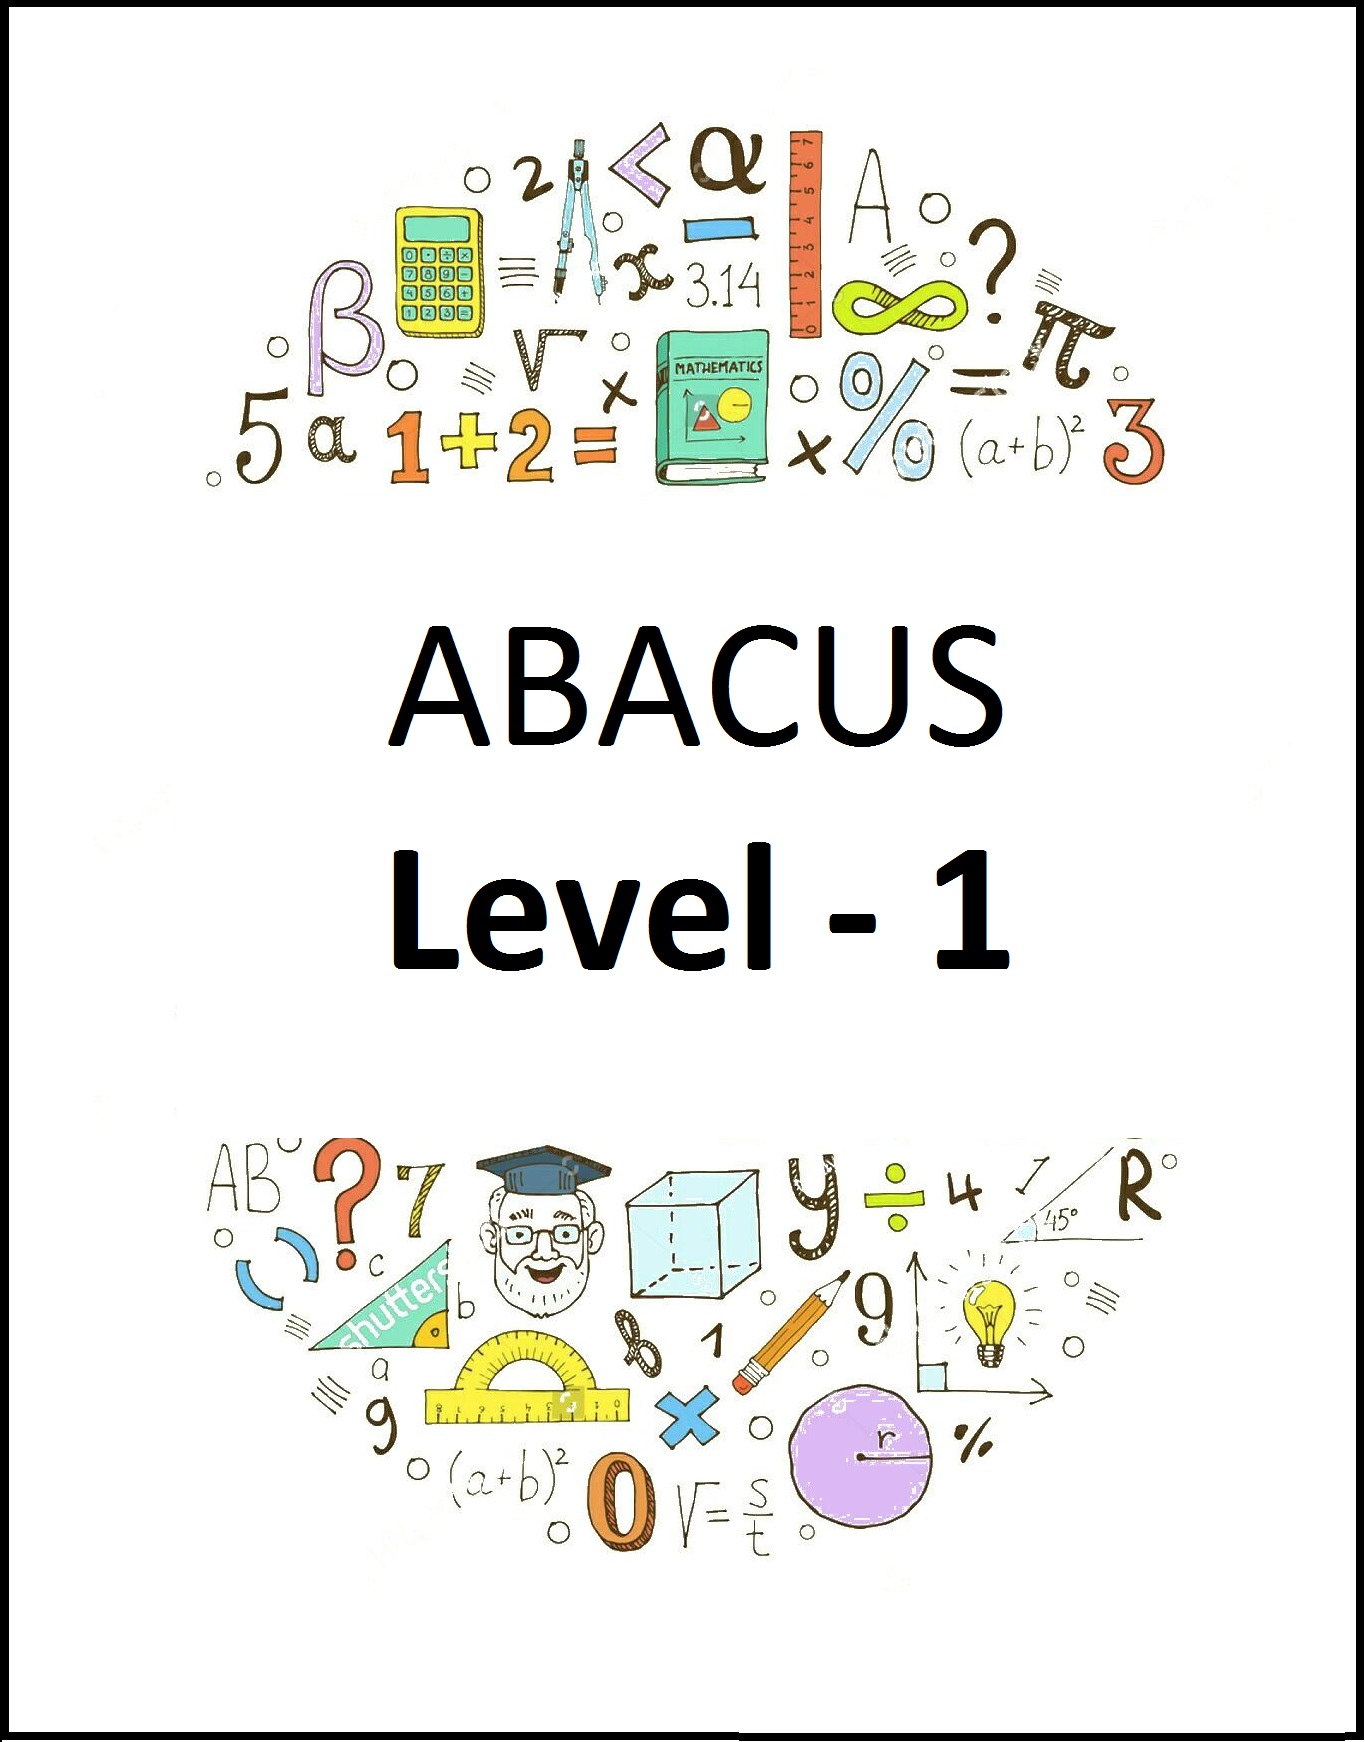 Abacus Practice Worksheets Level 1 - Funwithworksheets intended for Free Printable Abacus Worksheets